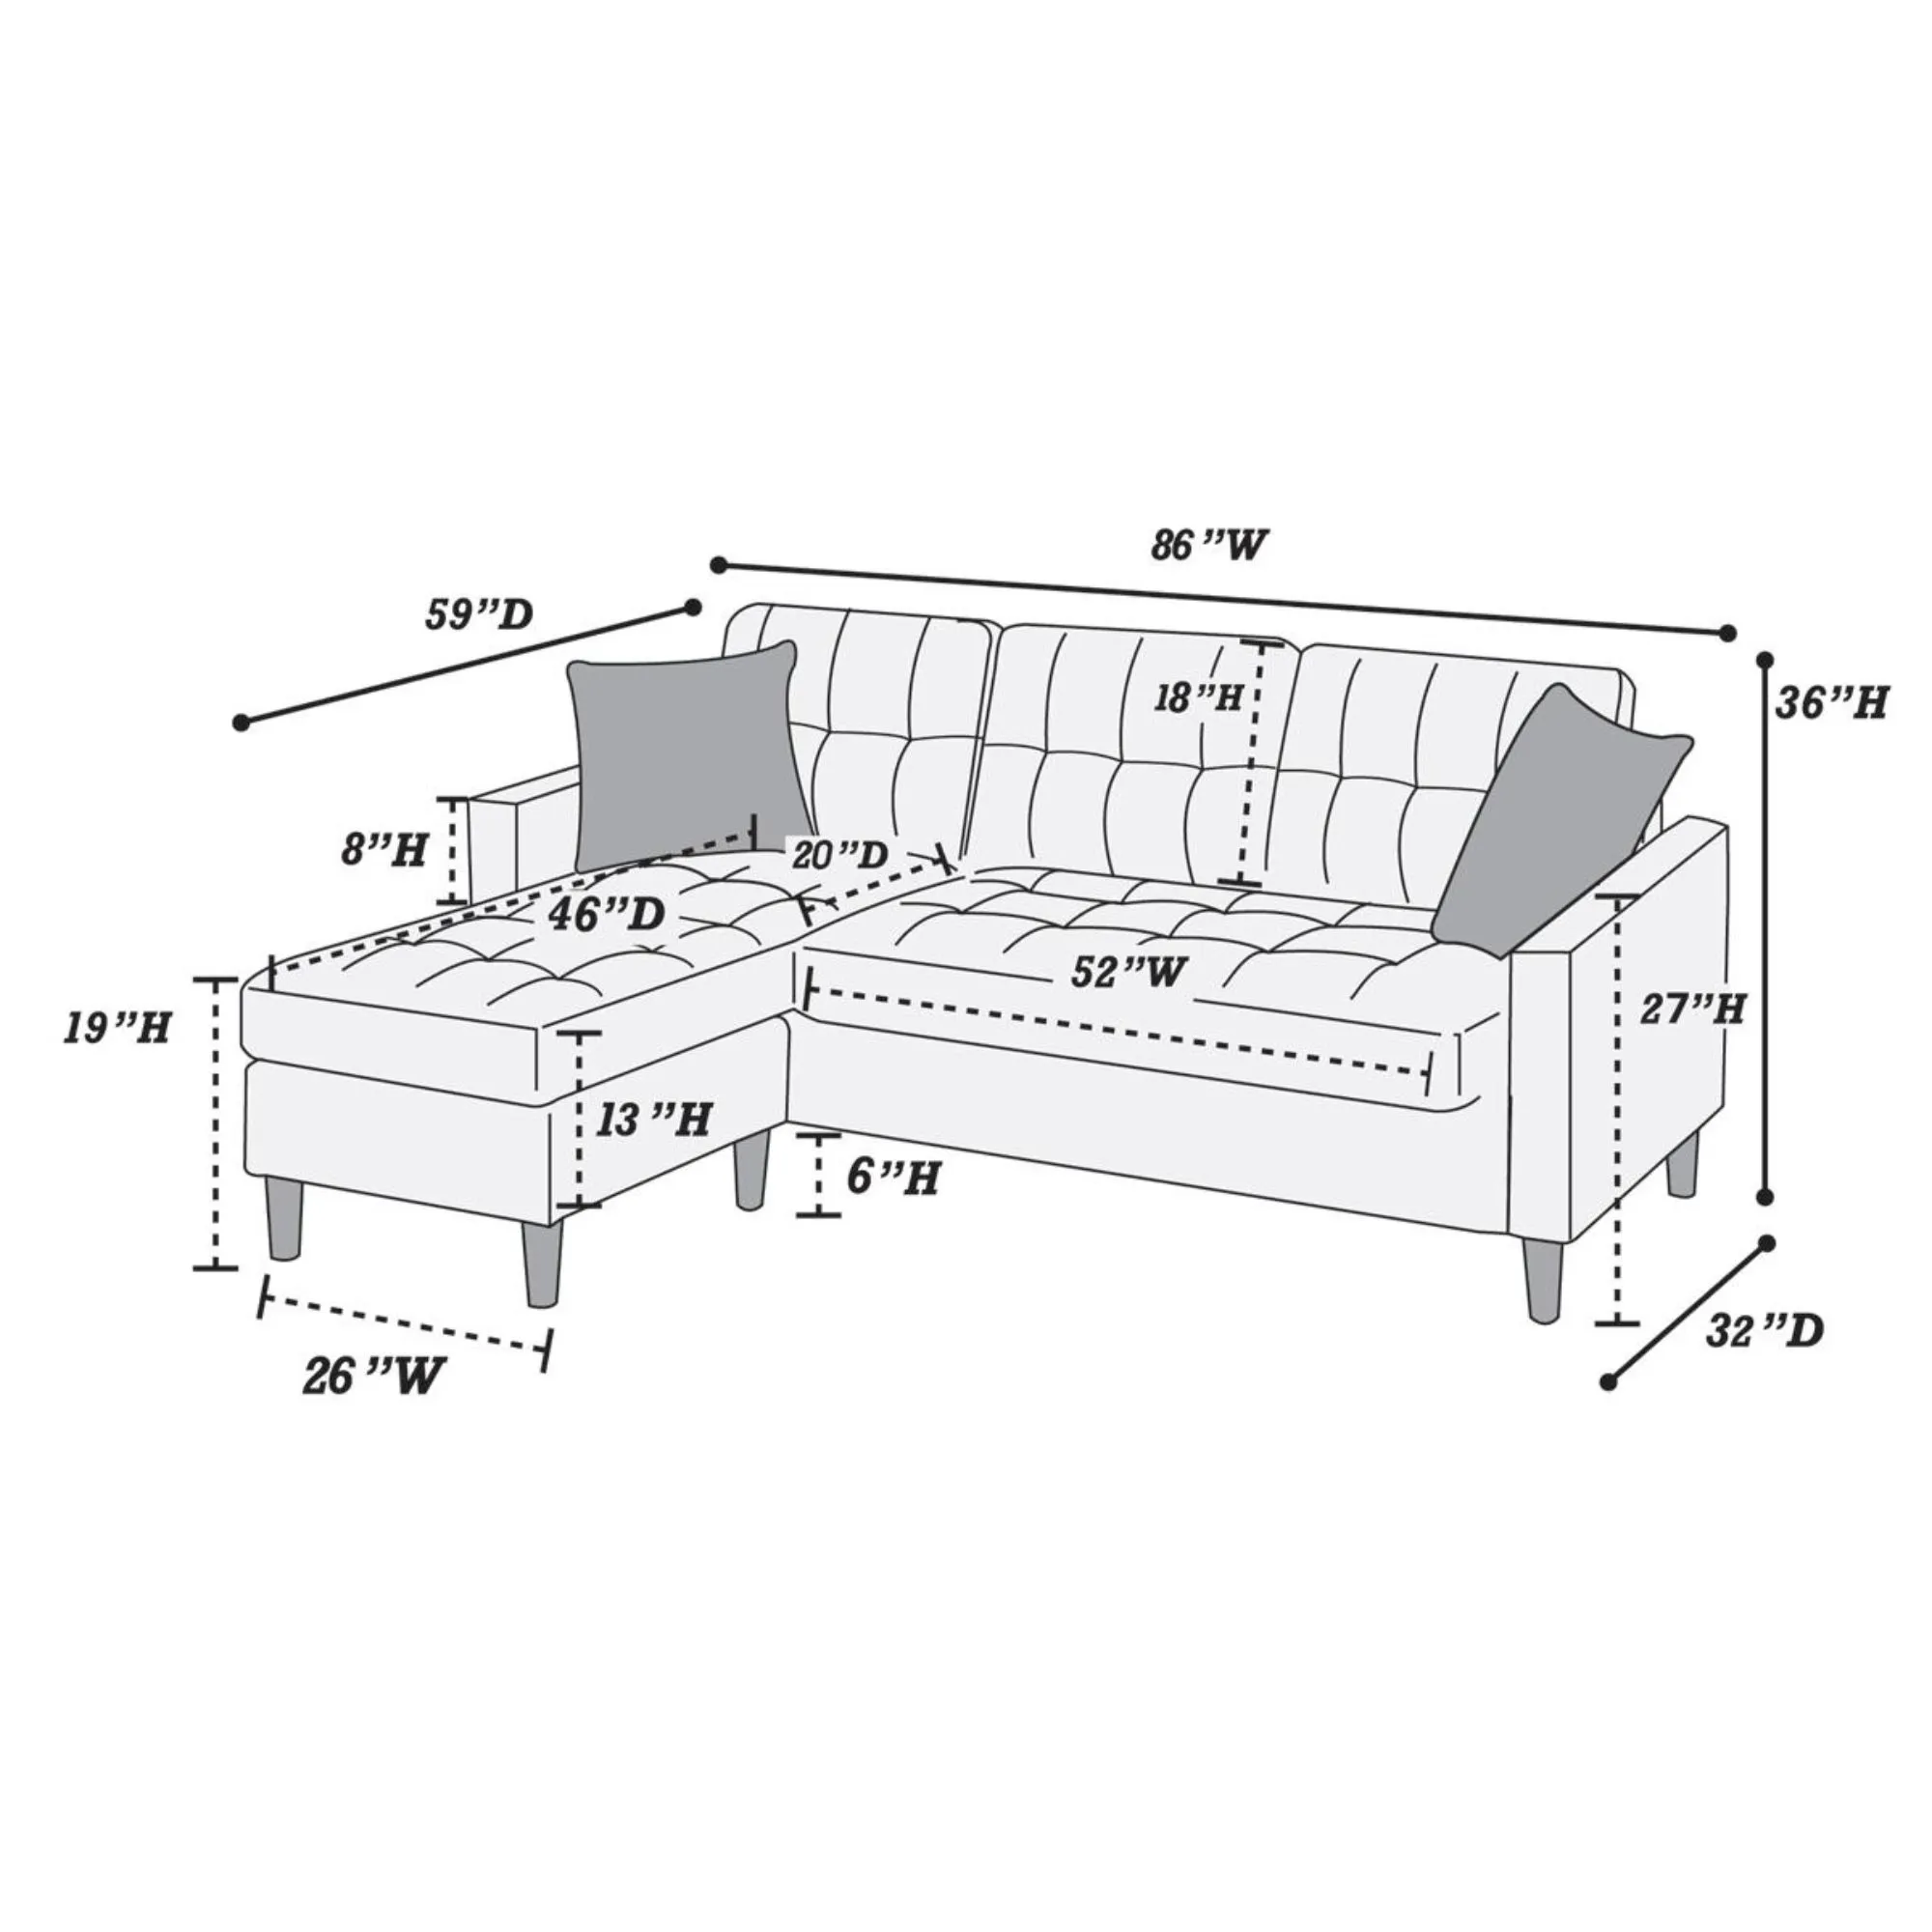 Polyfiber Modular Sectional Sofa Living Room Furniture with Reversible Chaise Pillows ufted Back